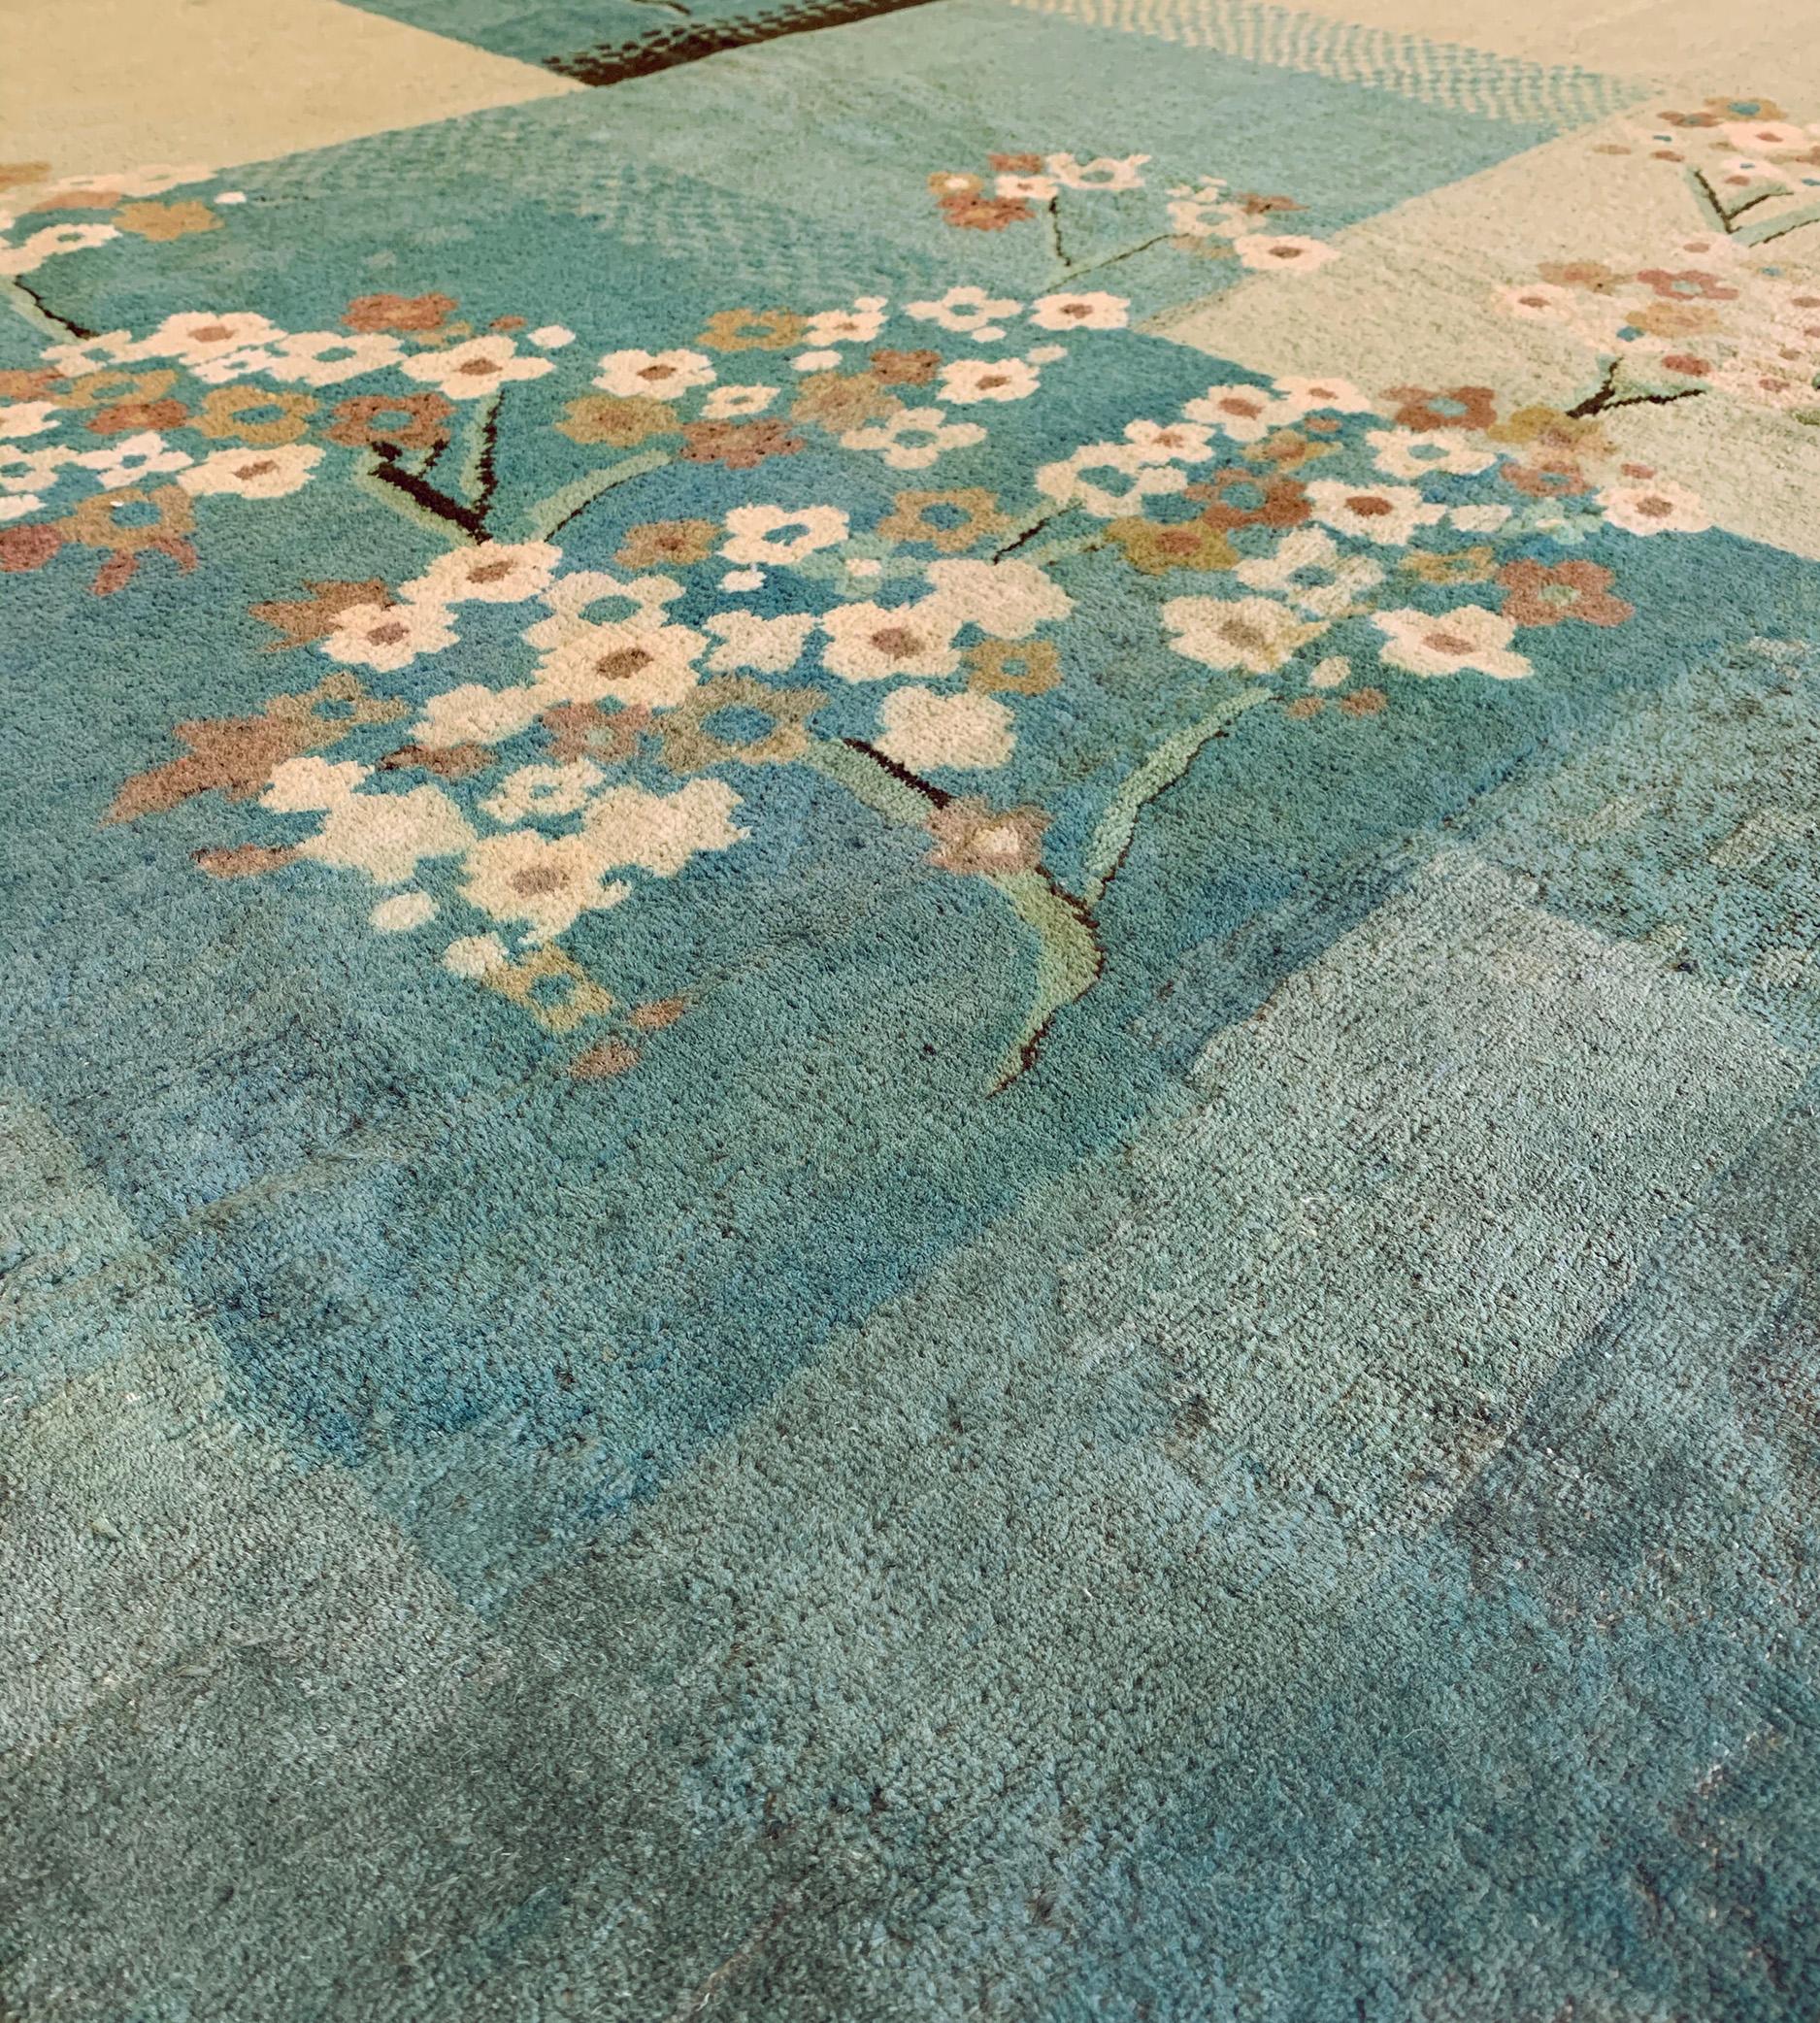 This traditional handwoven Chinese Deco rug has soft minty blue and ivory cream fields of shaded cells issuing refined hexagonal graded transitions, overlaid by elegant scrolling cherry blossoms.

In the rug trade, the term “Deco” applies to